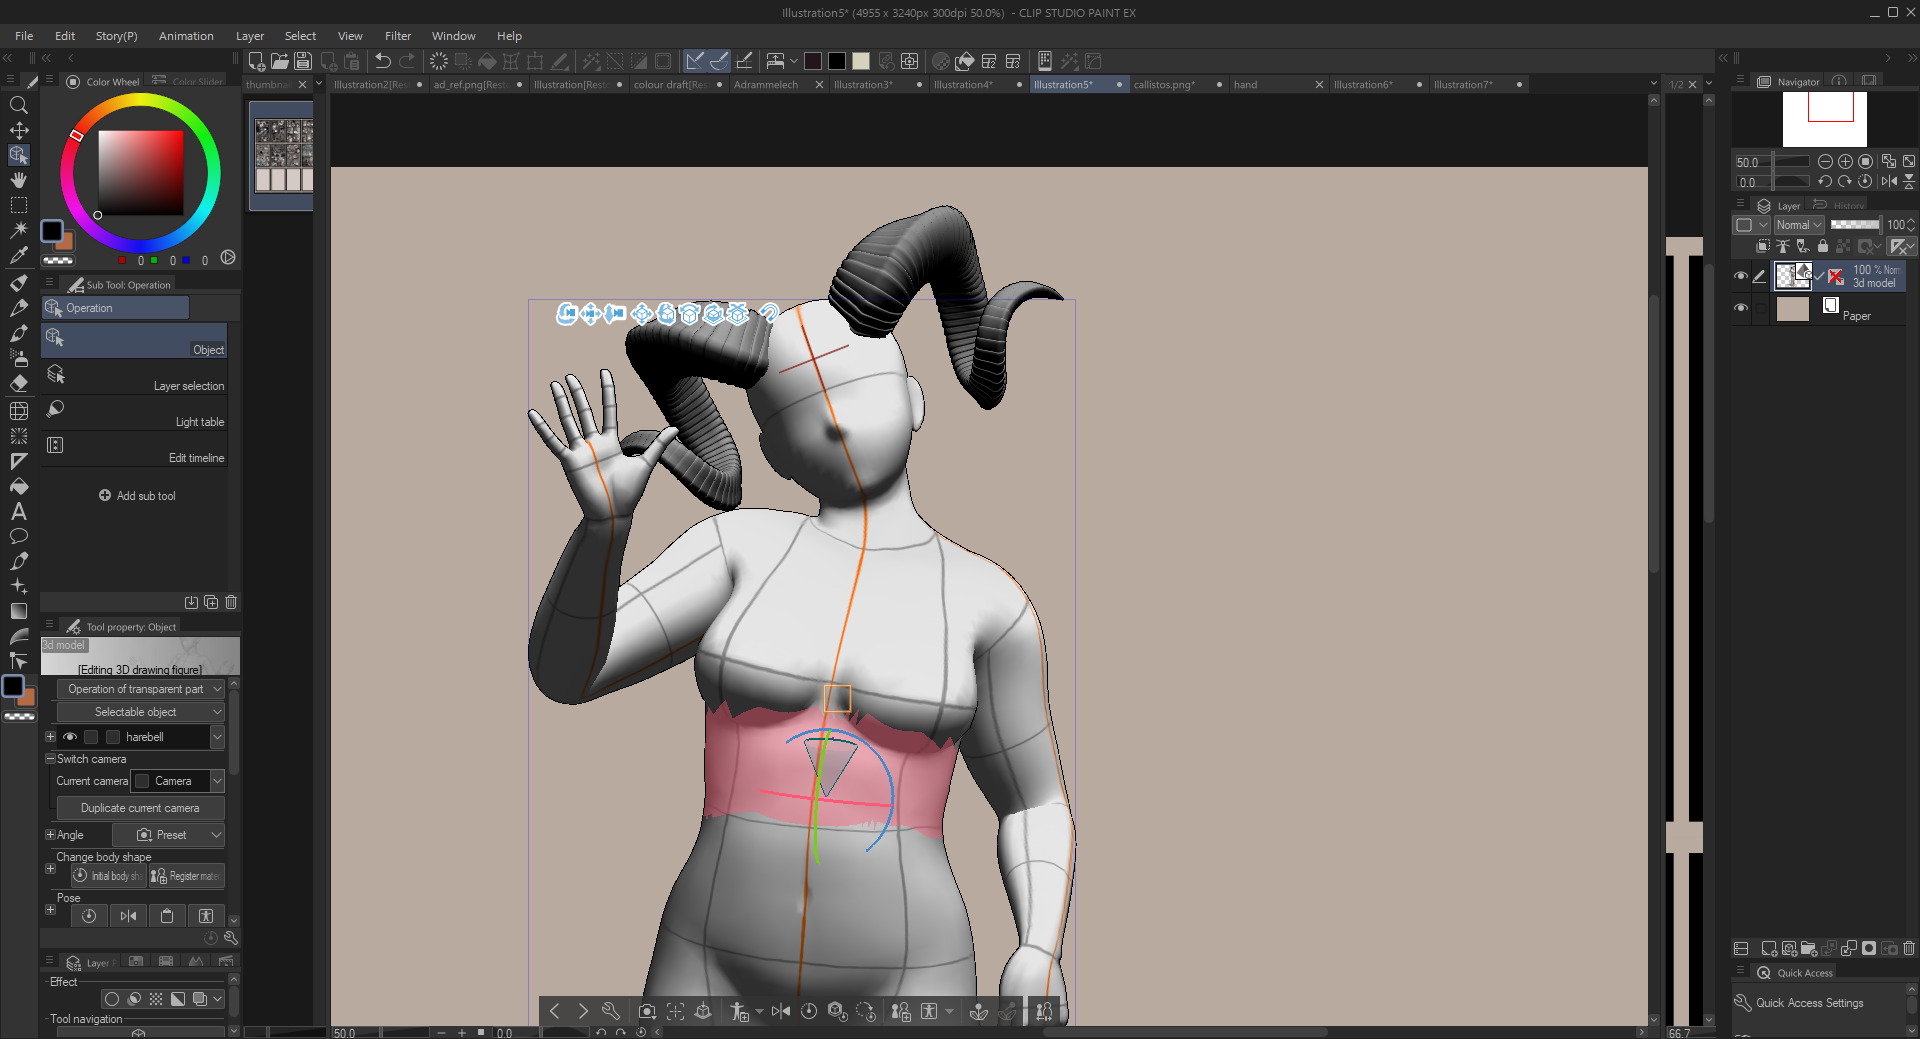 Screenshot of CSP, showing the built in pose model waving at the viewer, with another model of some horns attached to its head.